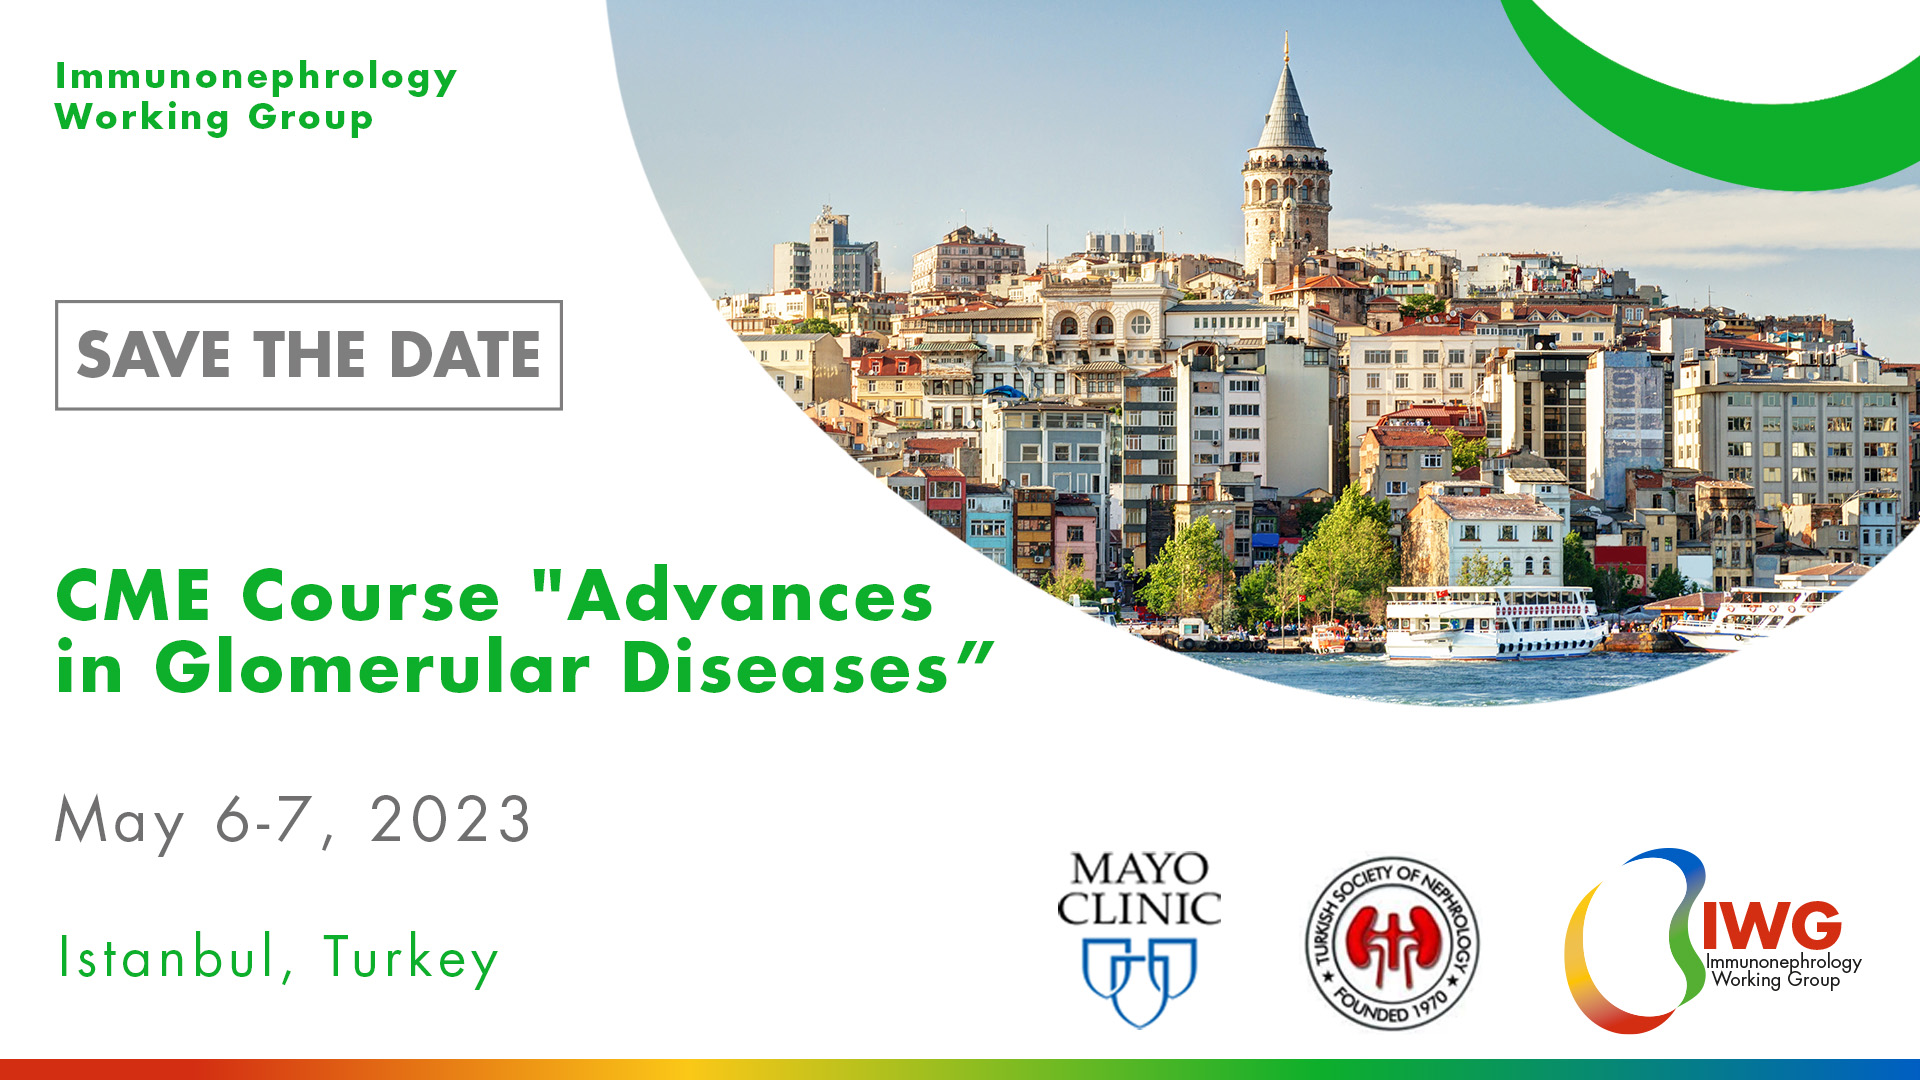 2023 CME Course “Advance in Glomerular Diseases”